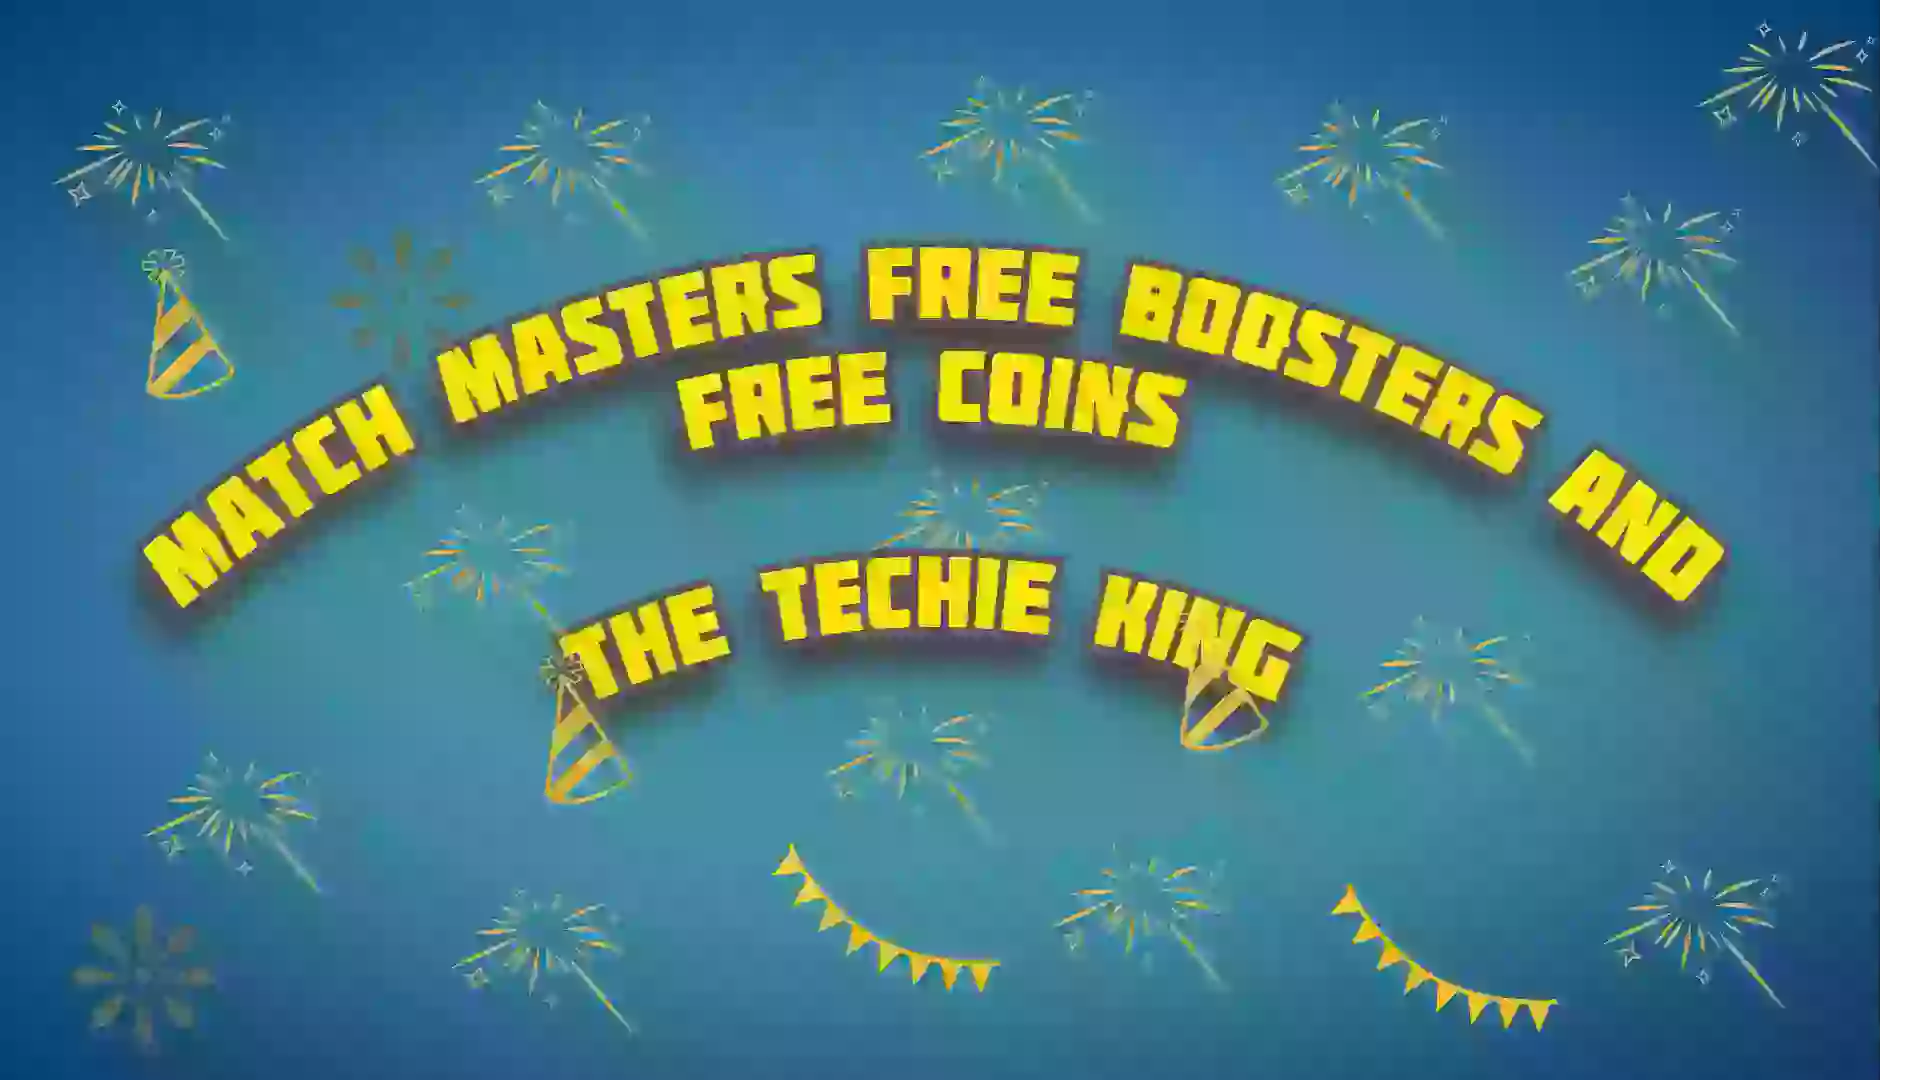 Match Masters Free Boosters And Daily Gifts